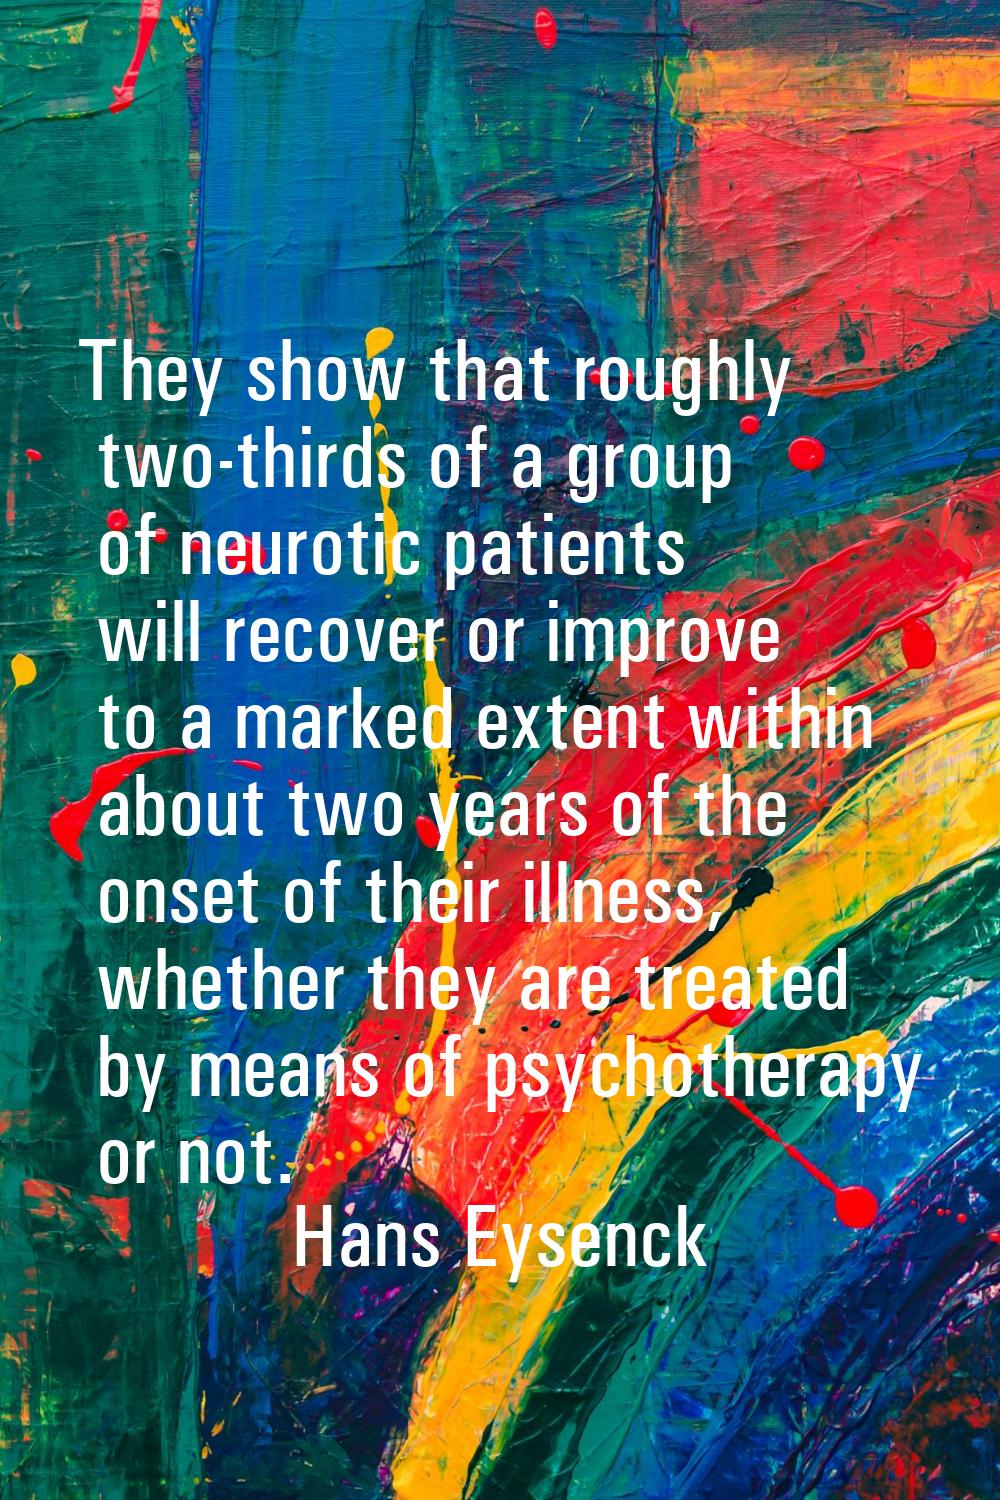 They show that roughly two-thirds of a group of neurotic patients will recover or improve to a mark